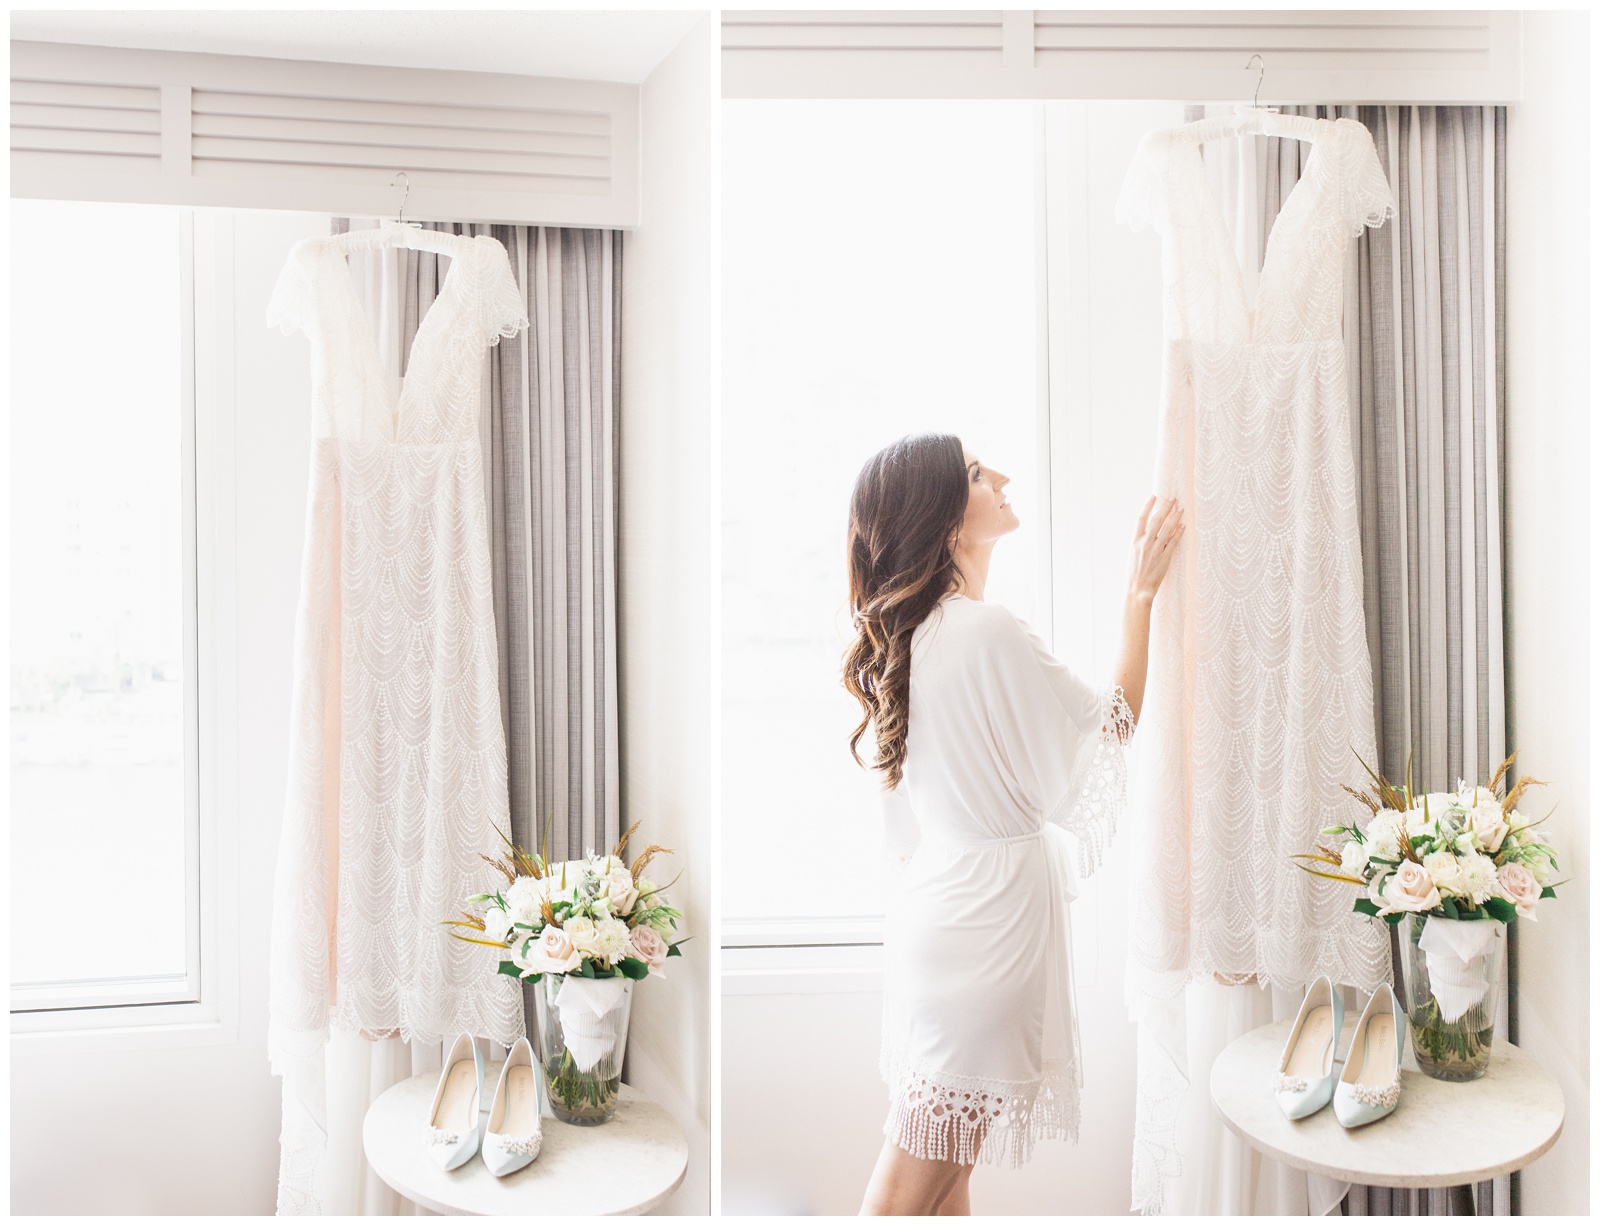 Vintage wedding dress hanging with shoes and bride's bouquet | Matlock and Kelly Photography